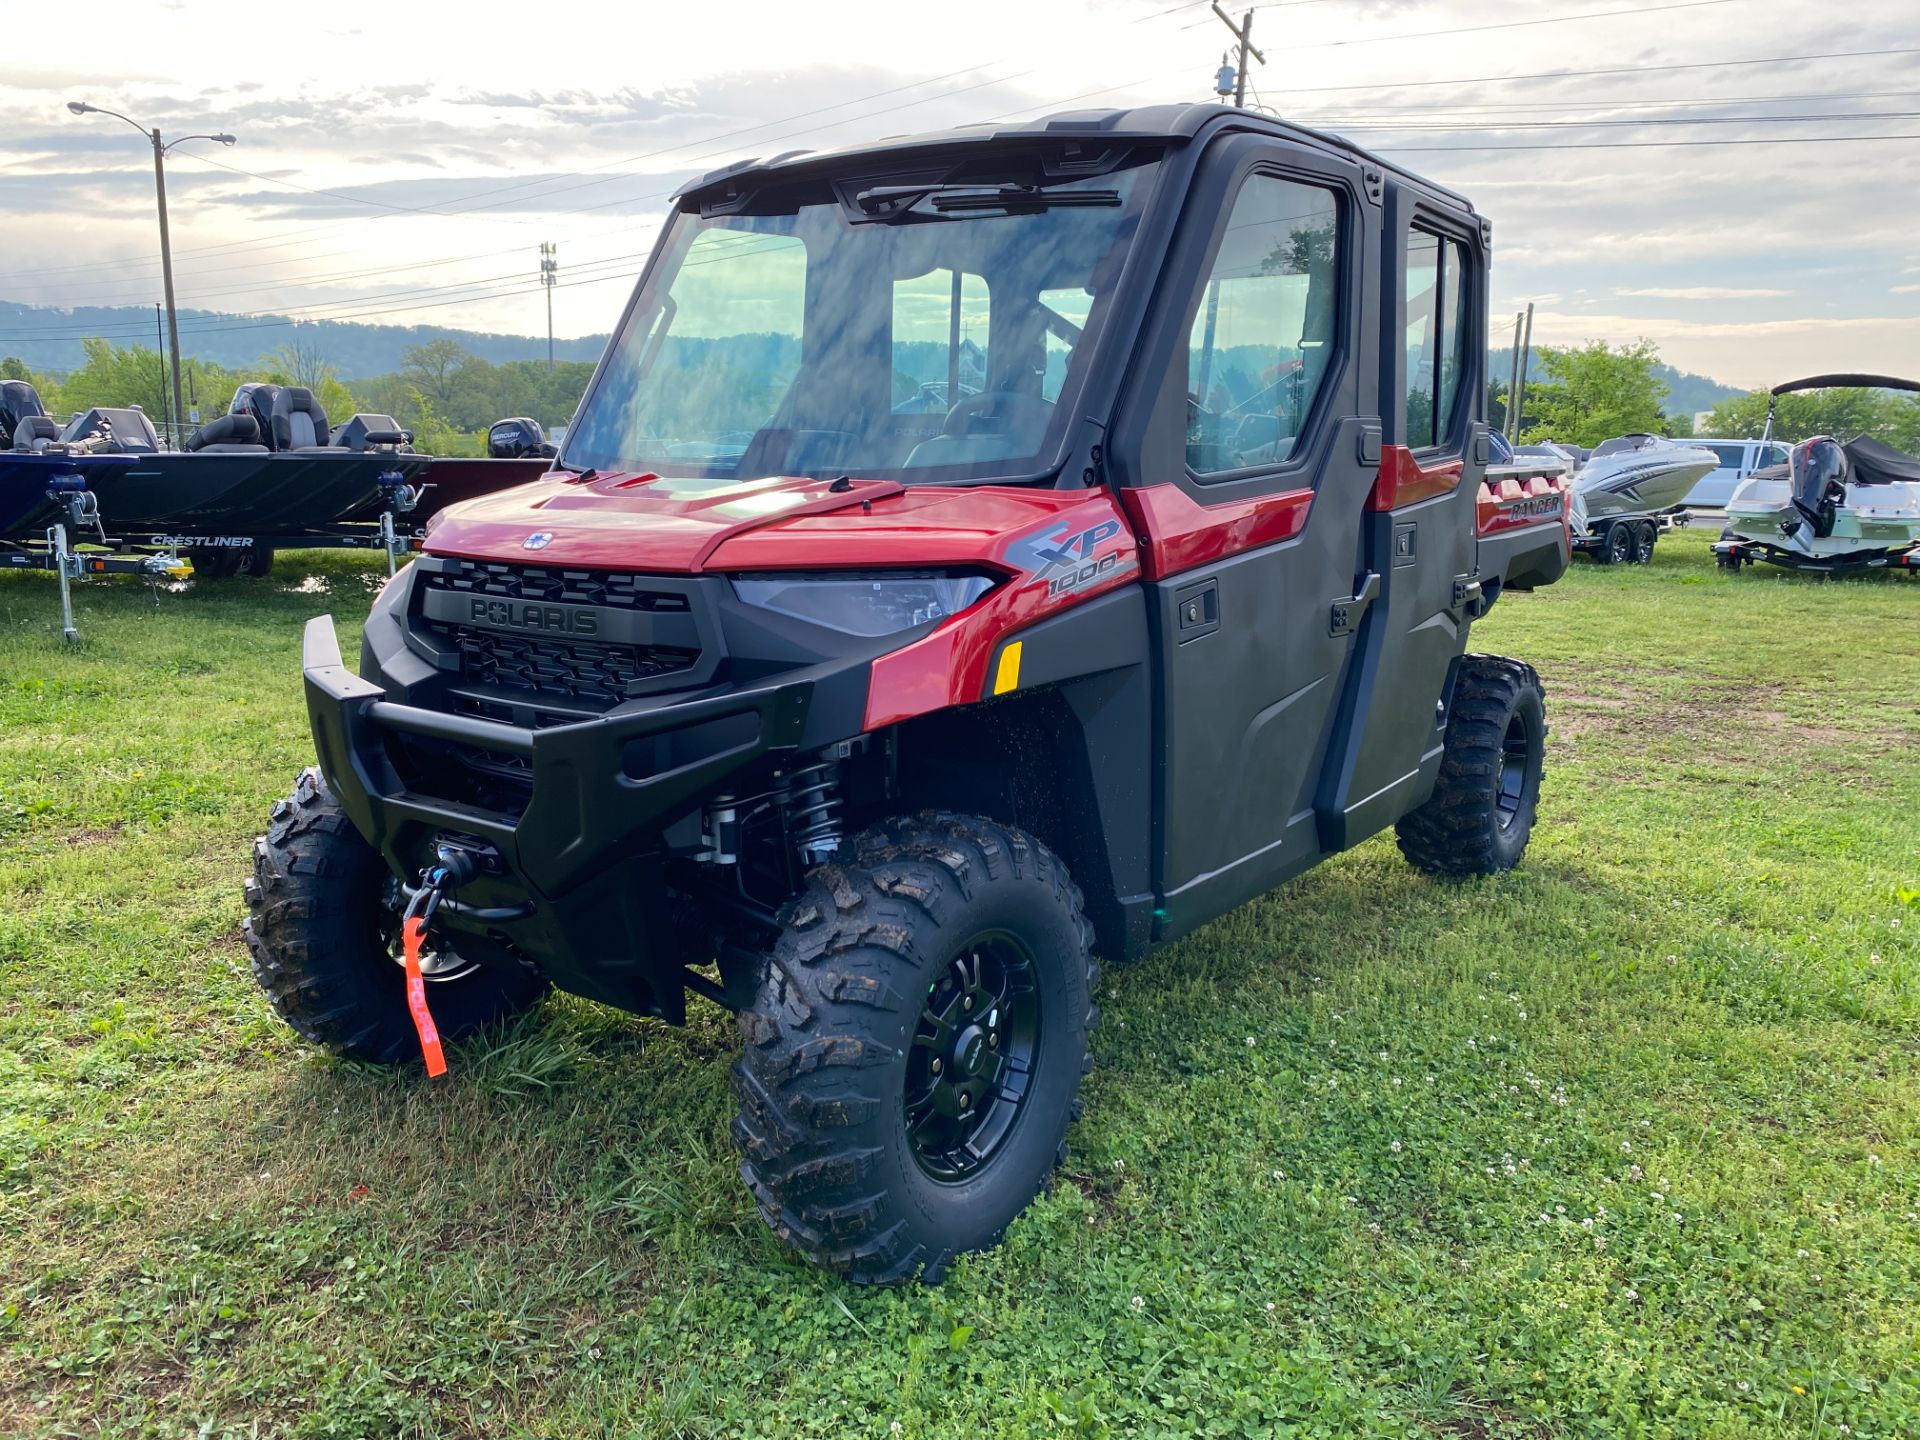 2025 Polaris Ranger Crew XP 1000 NorthStar Edition Ultimate in Ooltewah, Tennessee - Photo 2